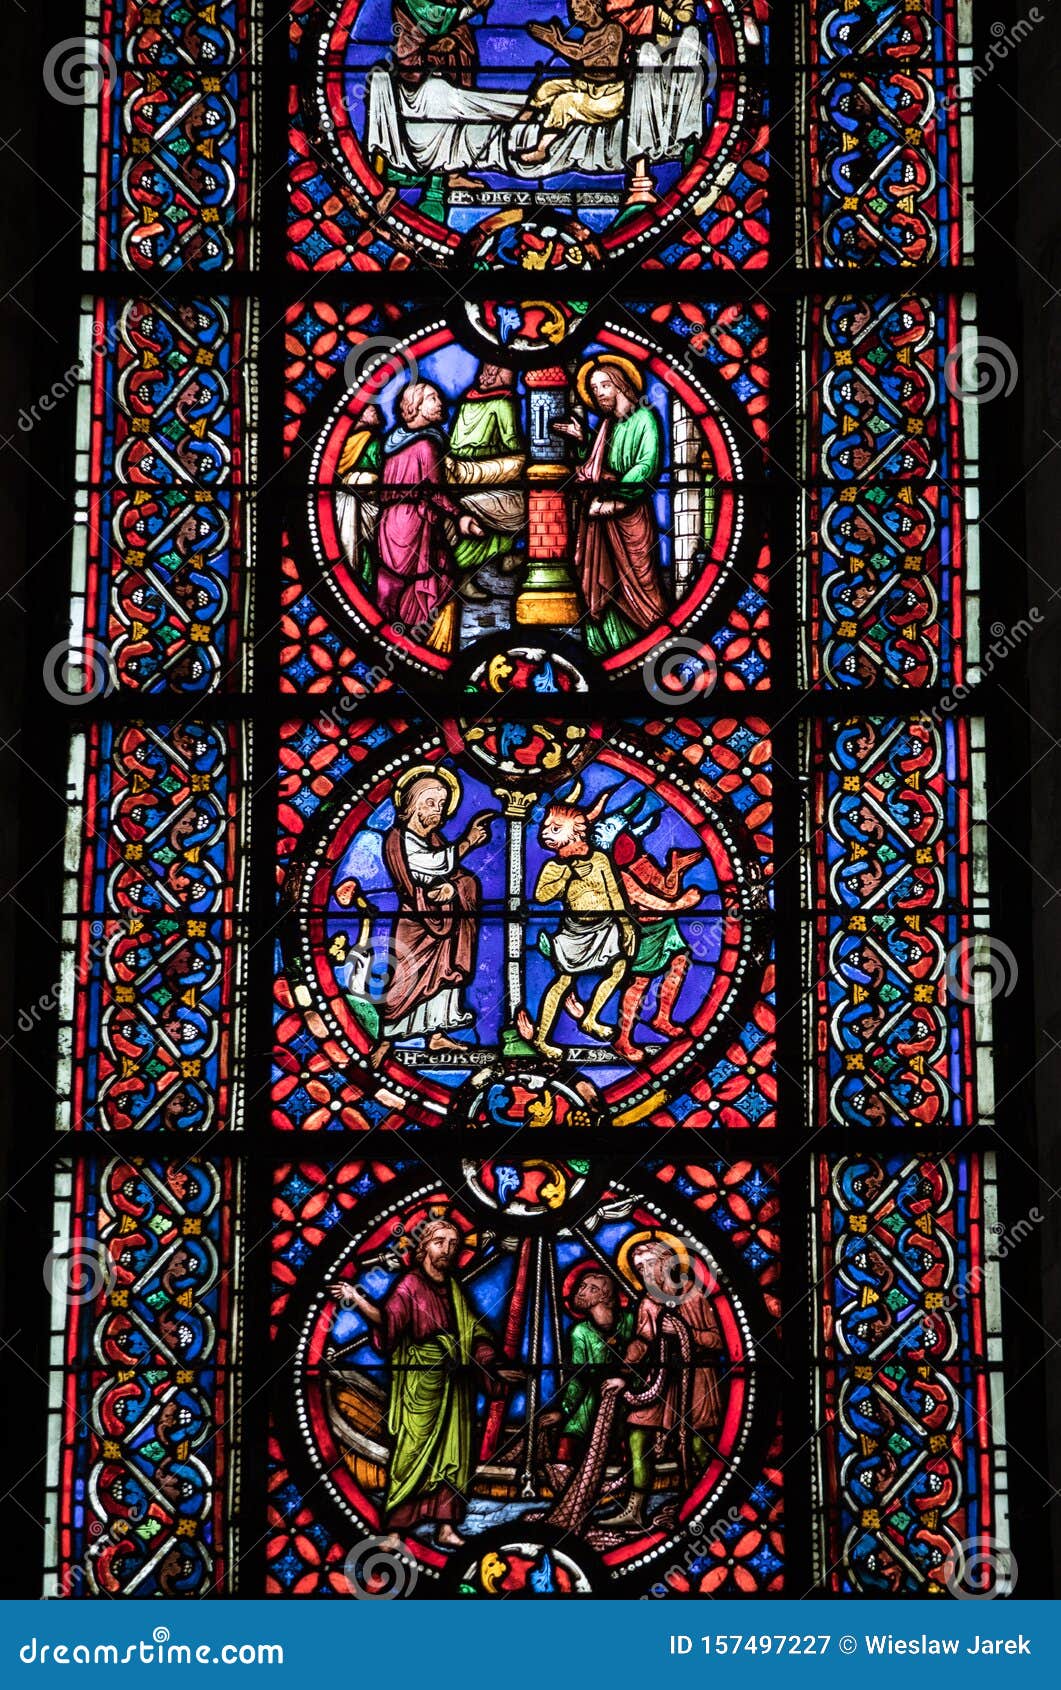 Colorful Stained Glass Windows In Troyes Cathedral Dedicated To Saint Peter And Saint Paul France Editorial Photography Image Of Stained Rose